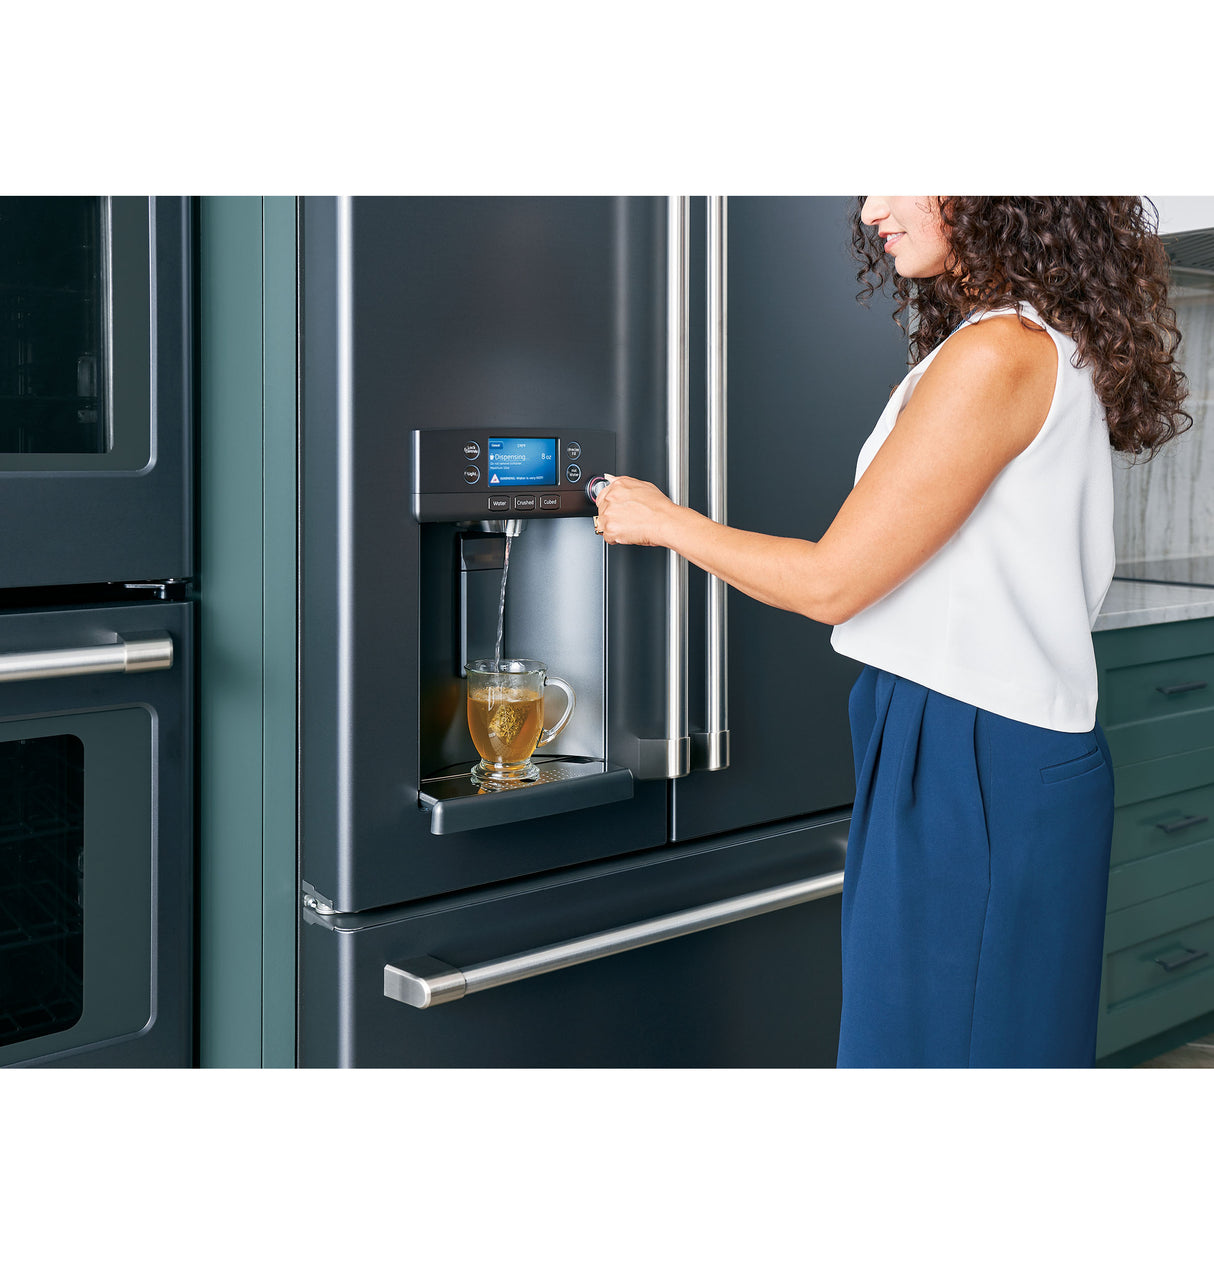 Caf(eback)(TM) ENERGY STAR(R) 27.7 Cu. Ft. Smart French-Door Refrigerator with Hot Water Dispenser - (CFE28TP4MW2)